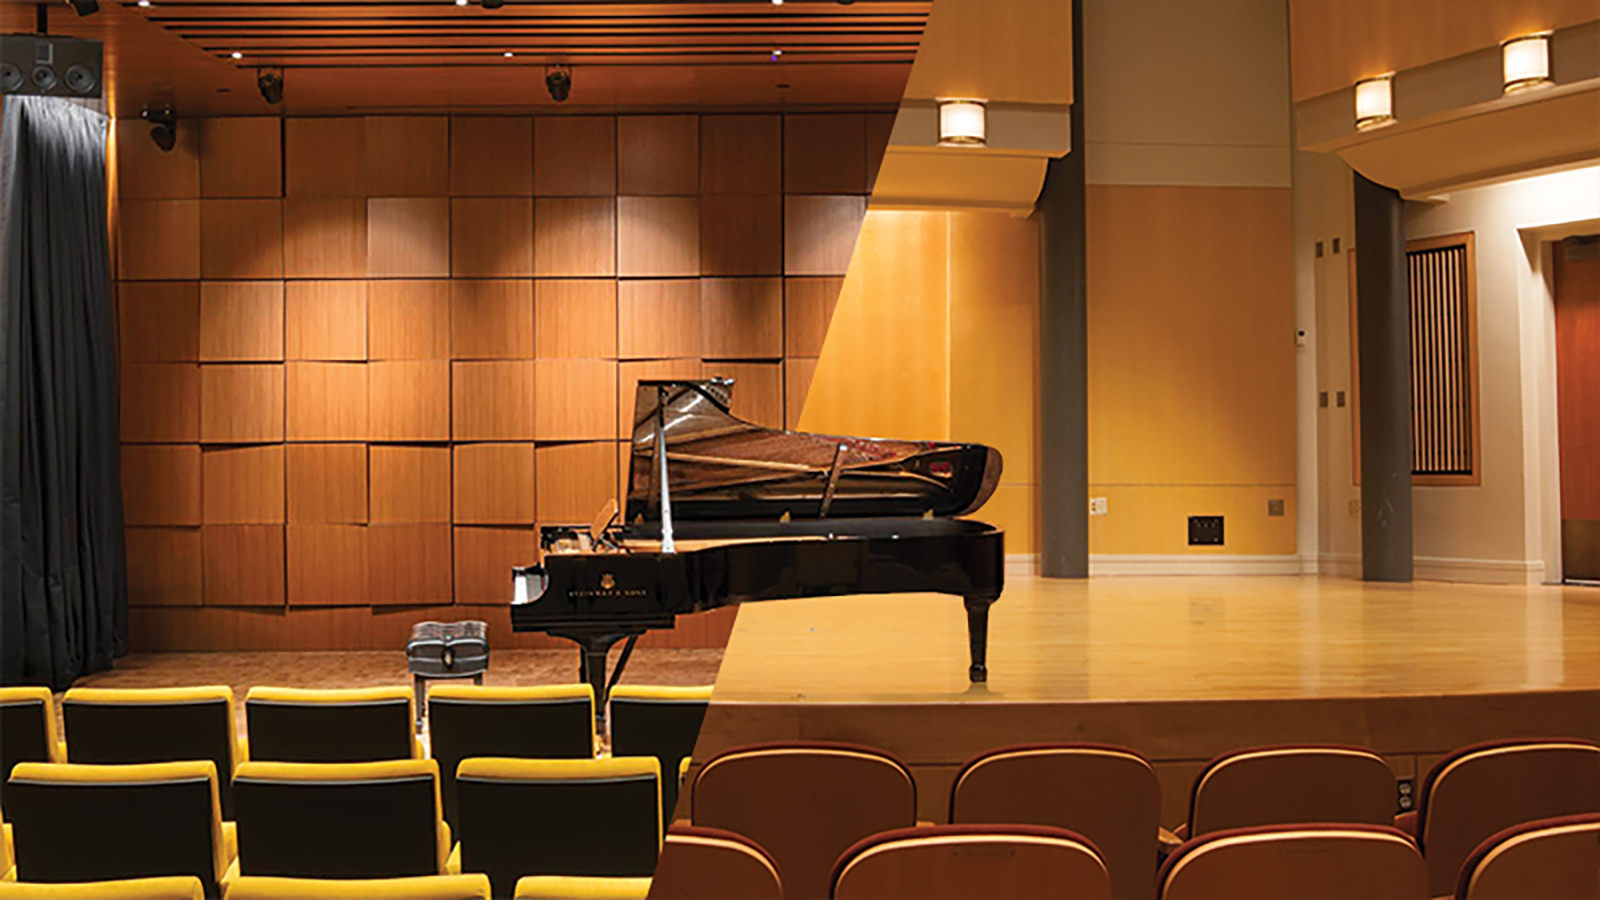 A grand piano on stage.